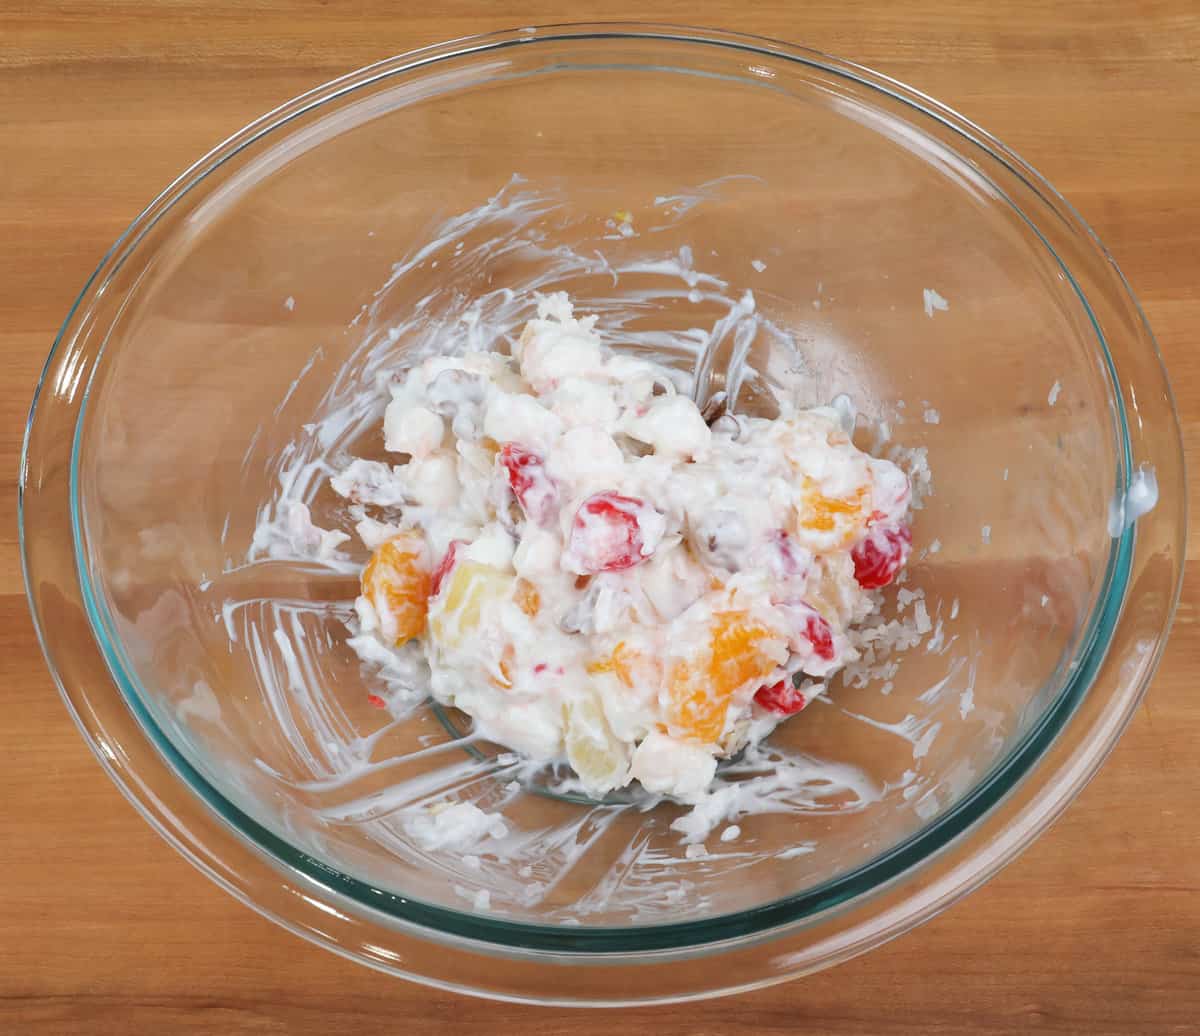 an ambrosia salad in a mixing bowl on a kitchen counter.